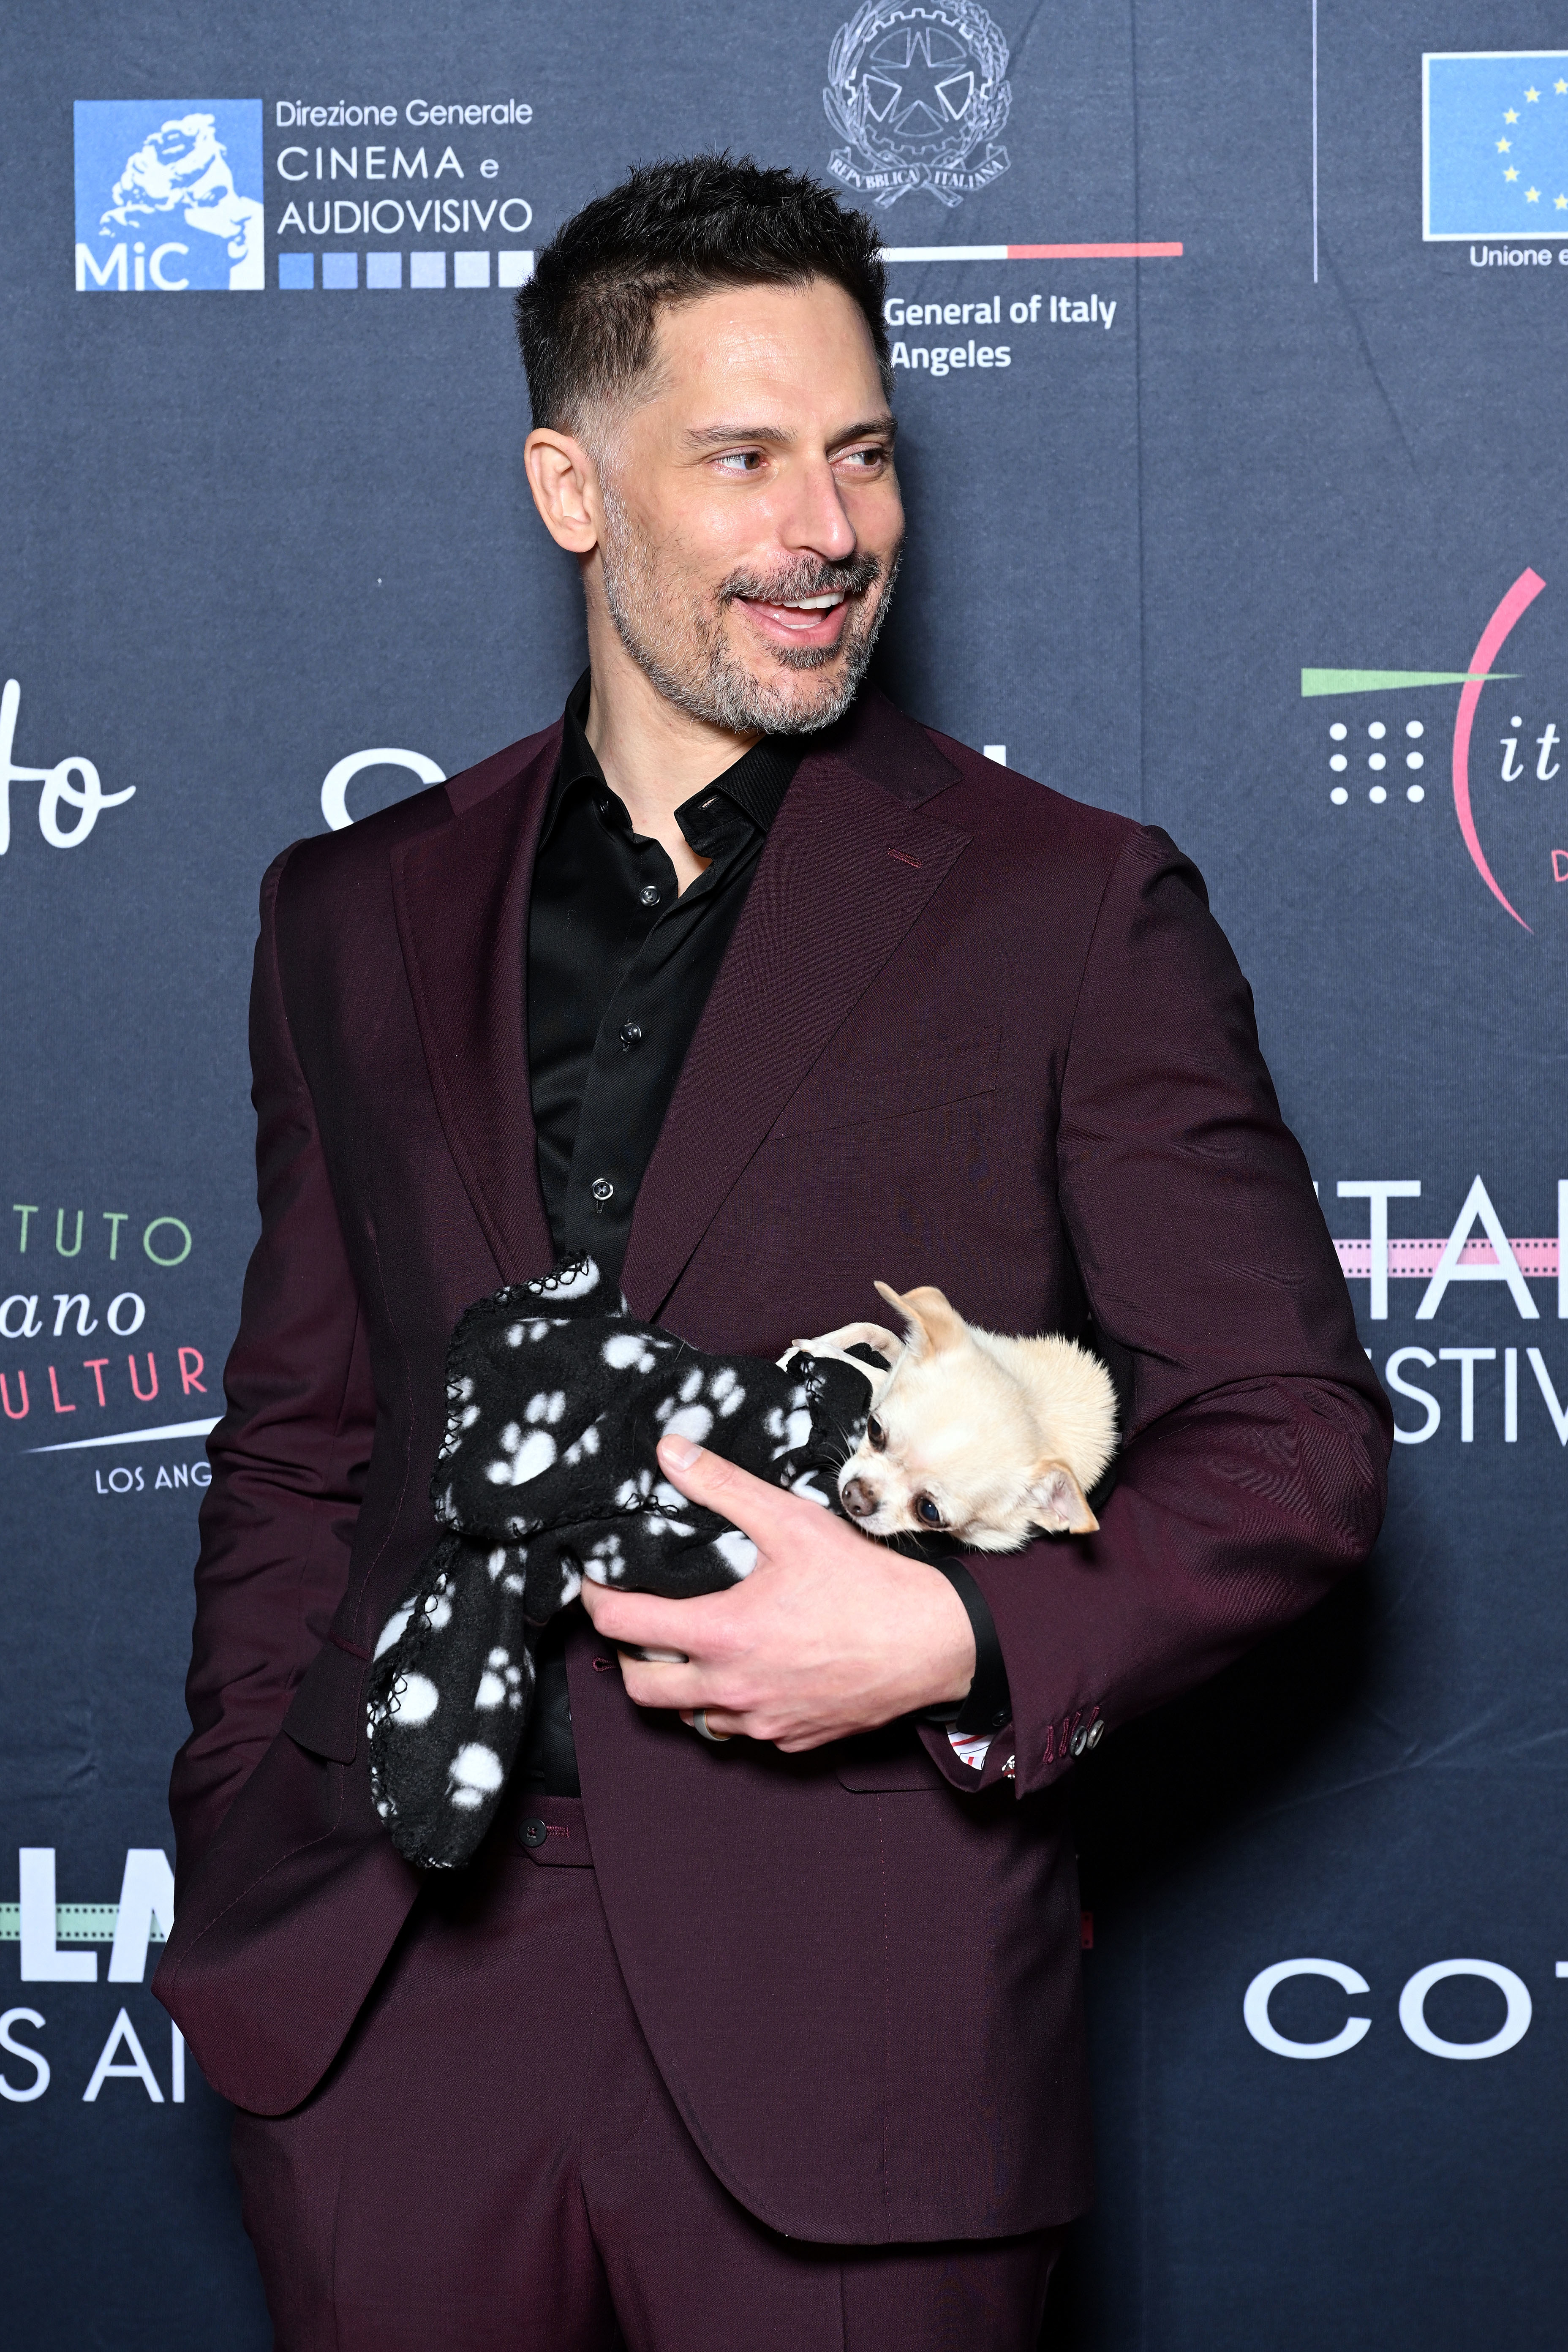 Joe in a burgundy suit on the red carpet while holding a small dog in one arm